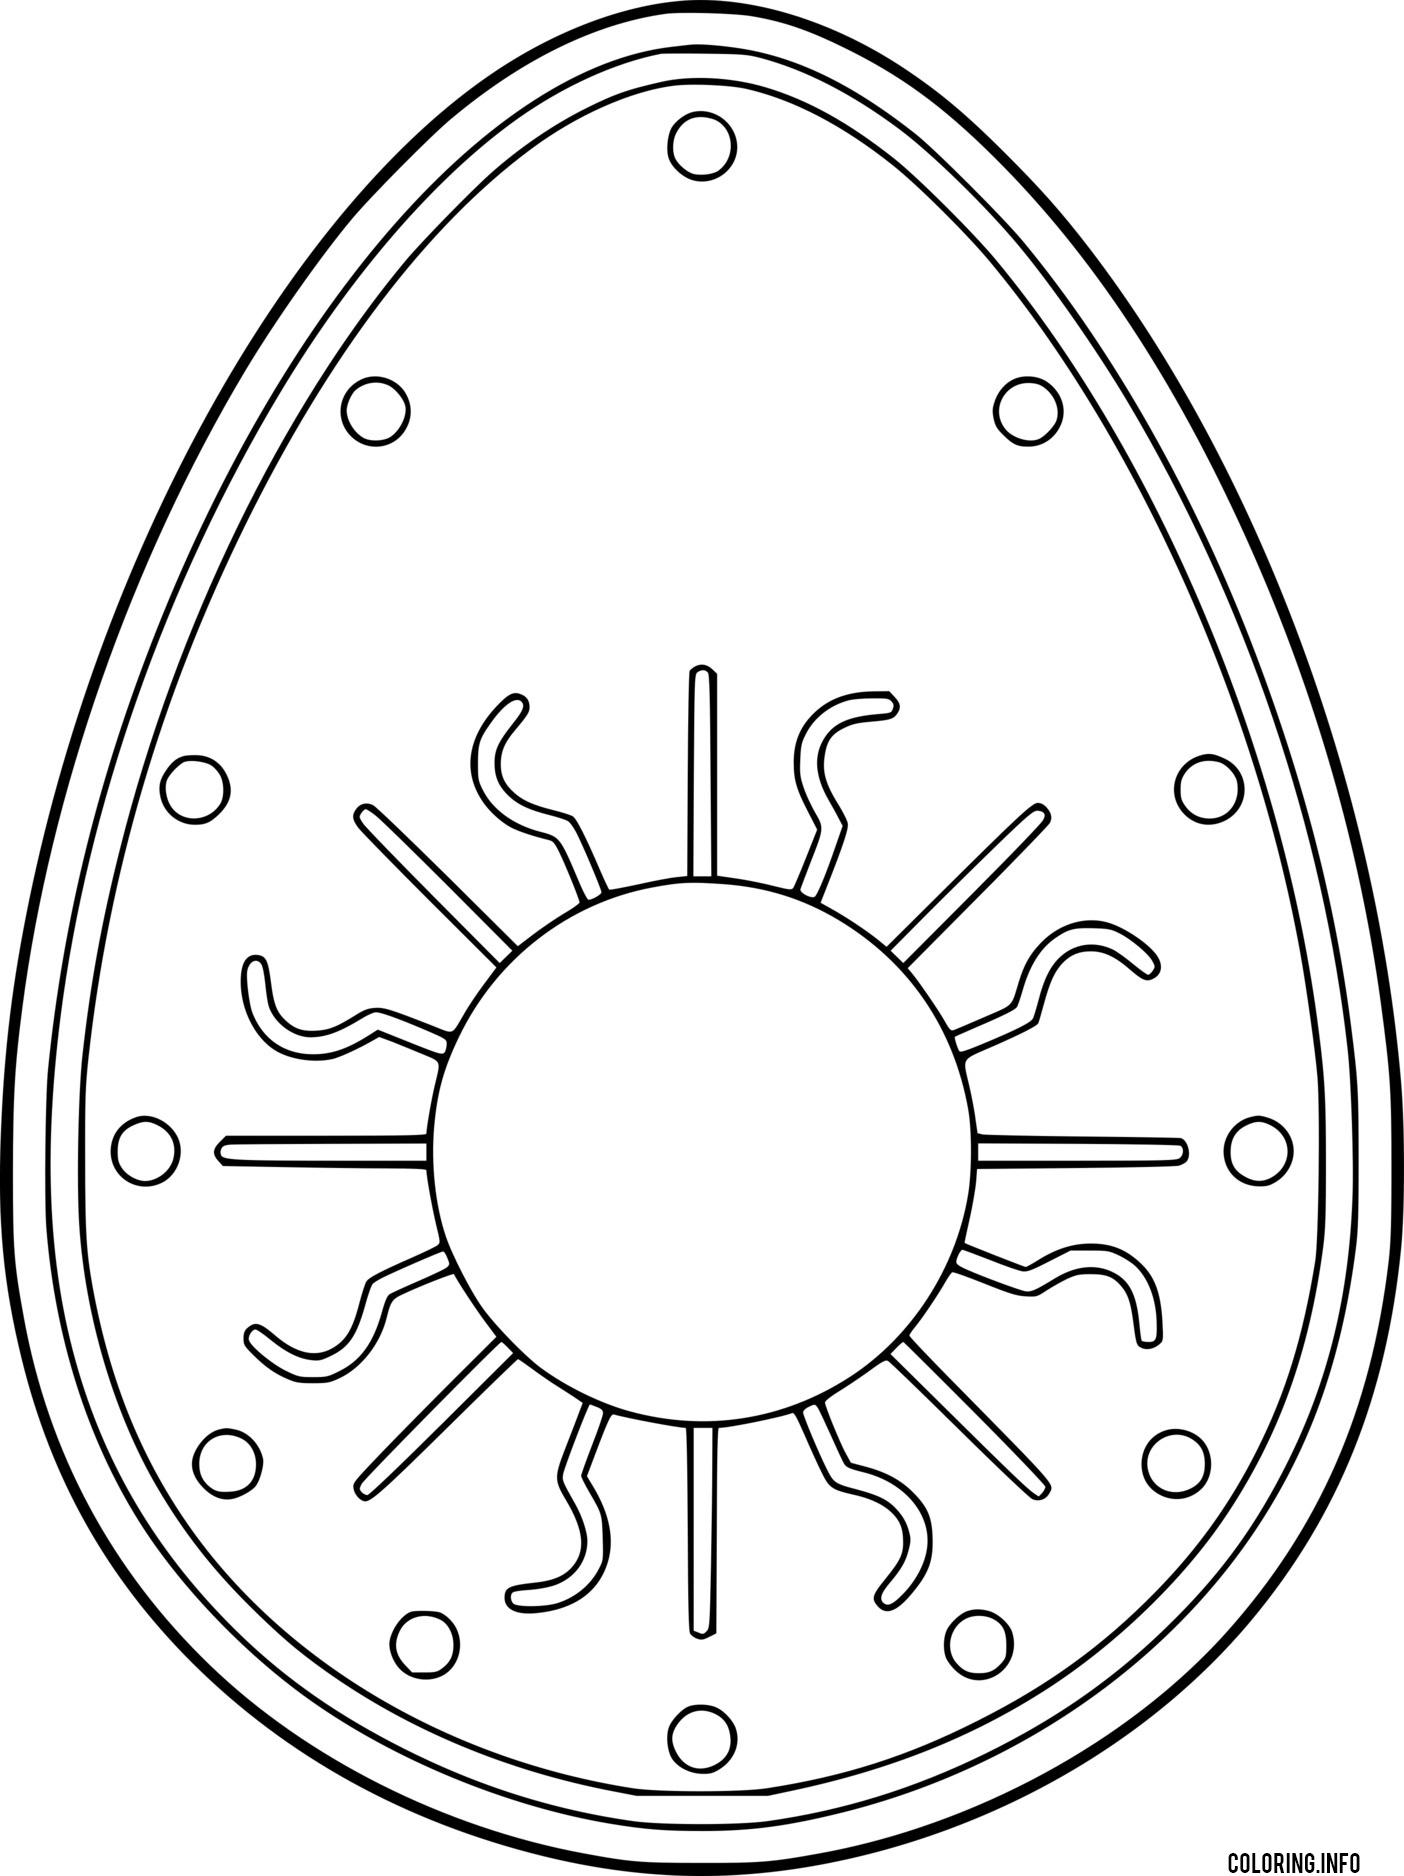 Easter Egg With The Sun Pattern coloring